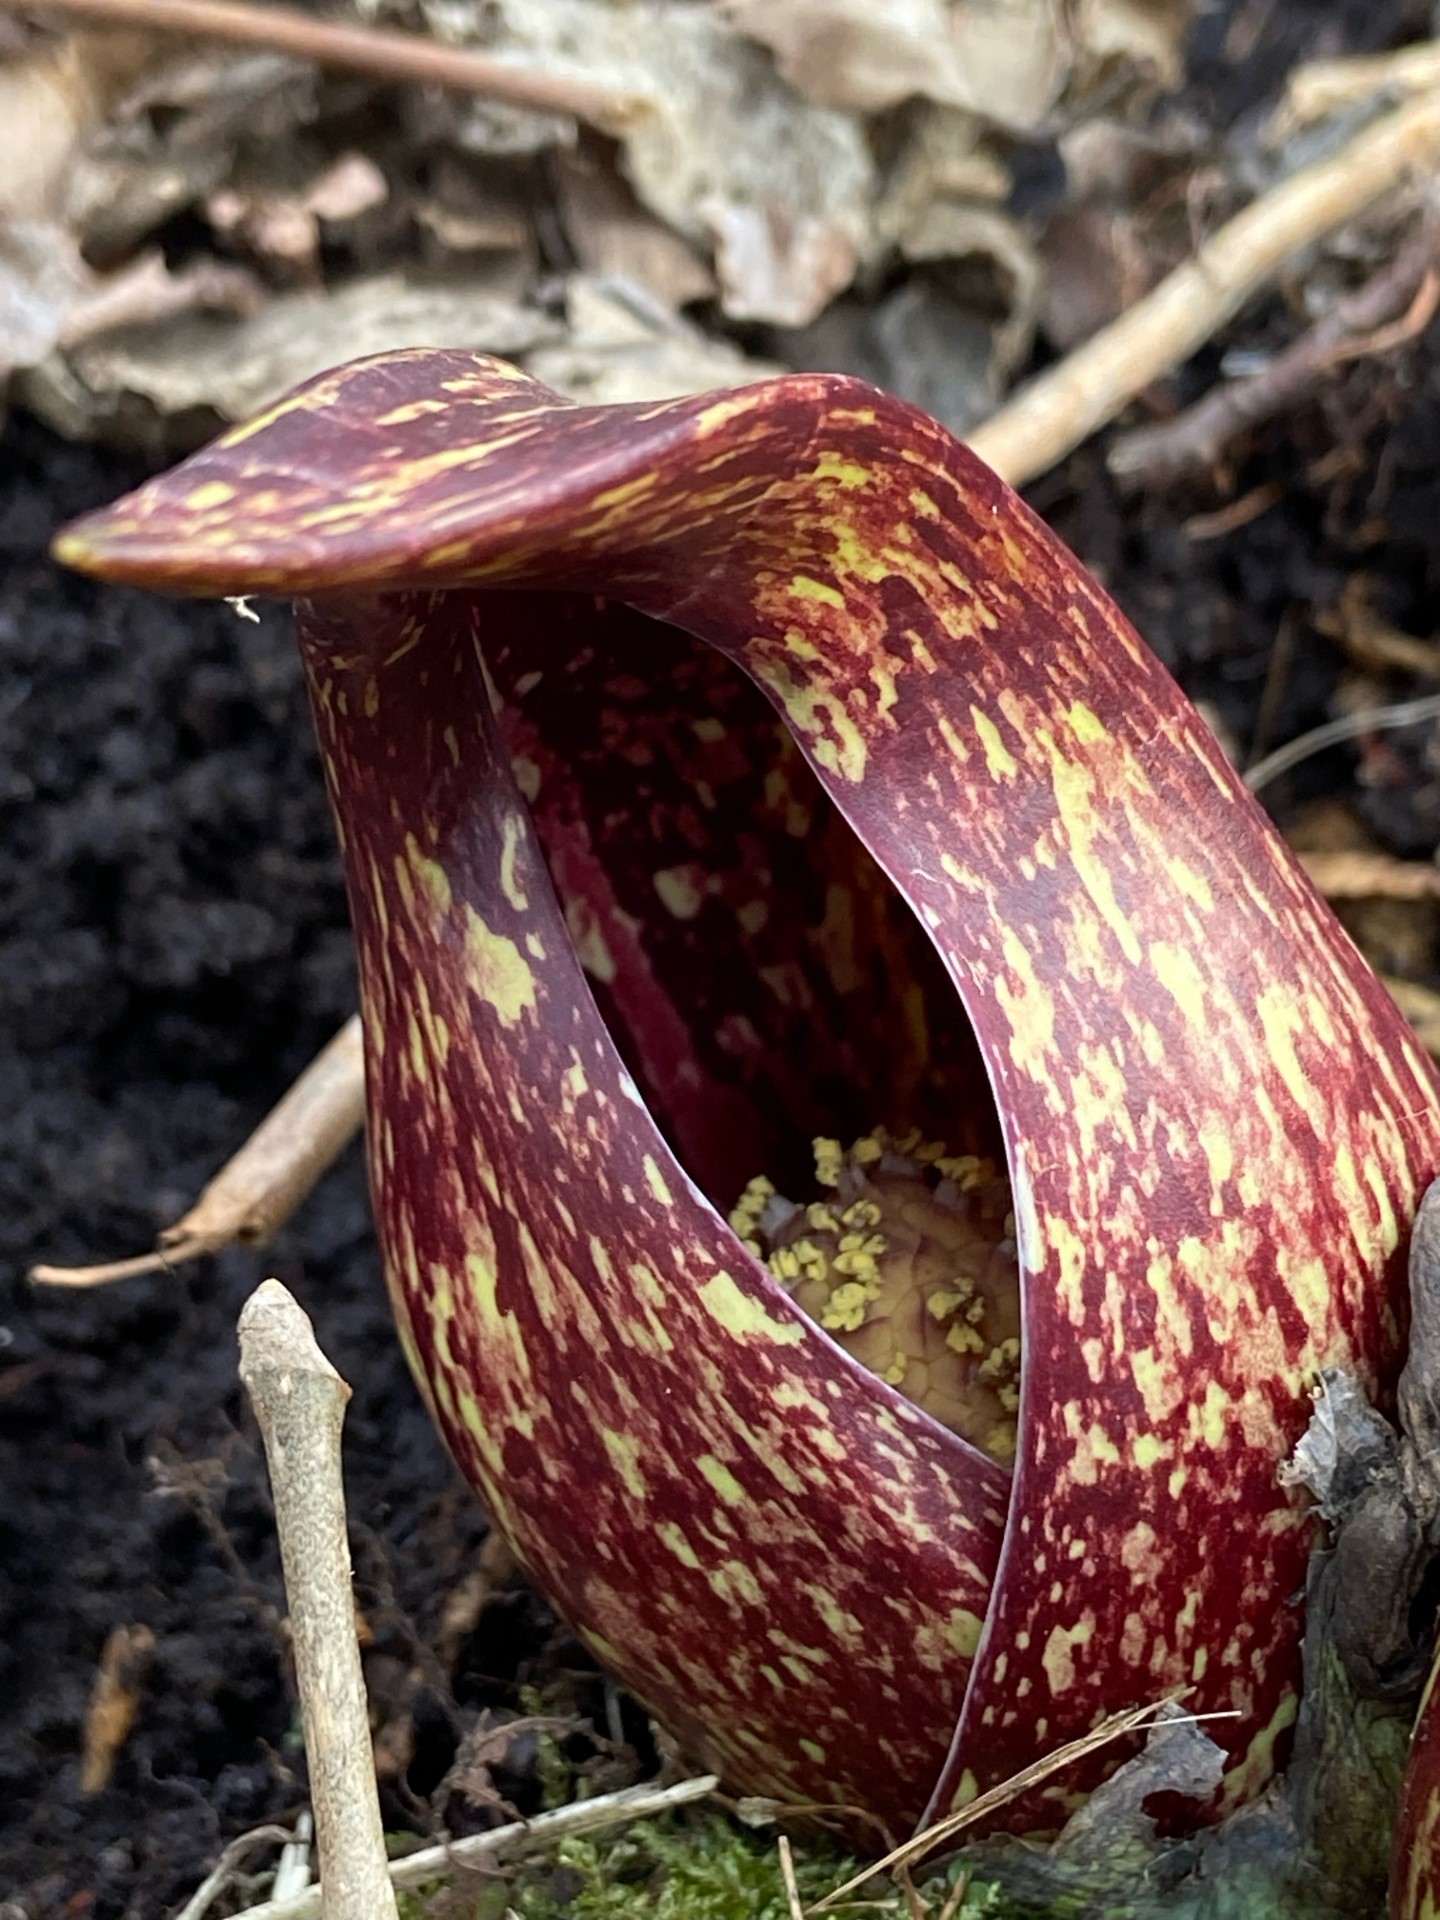 The first skunk cabbage we saw this year